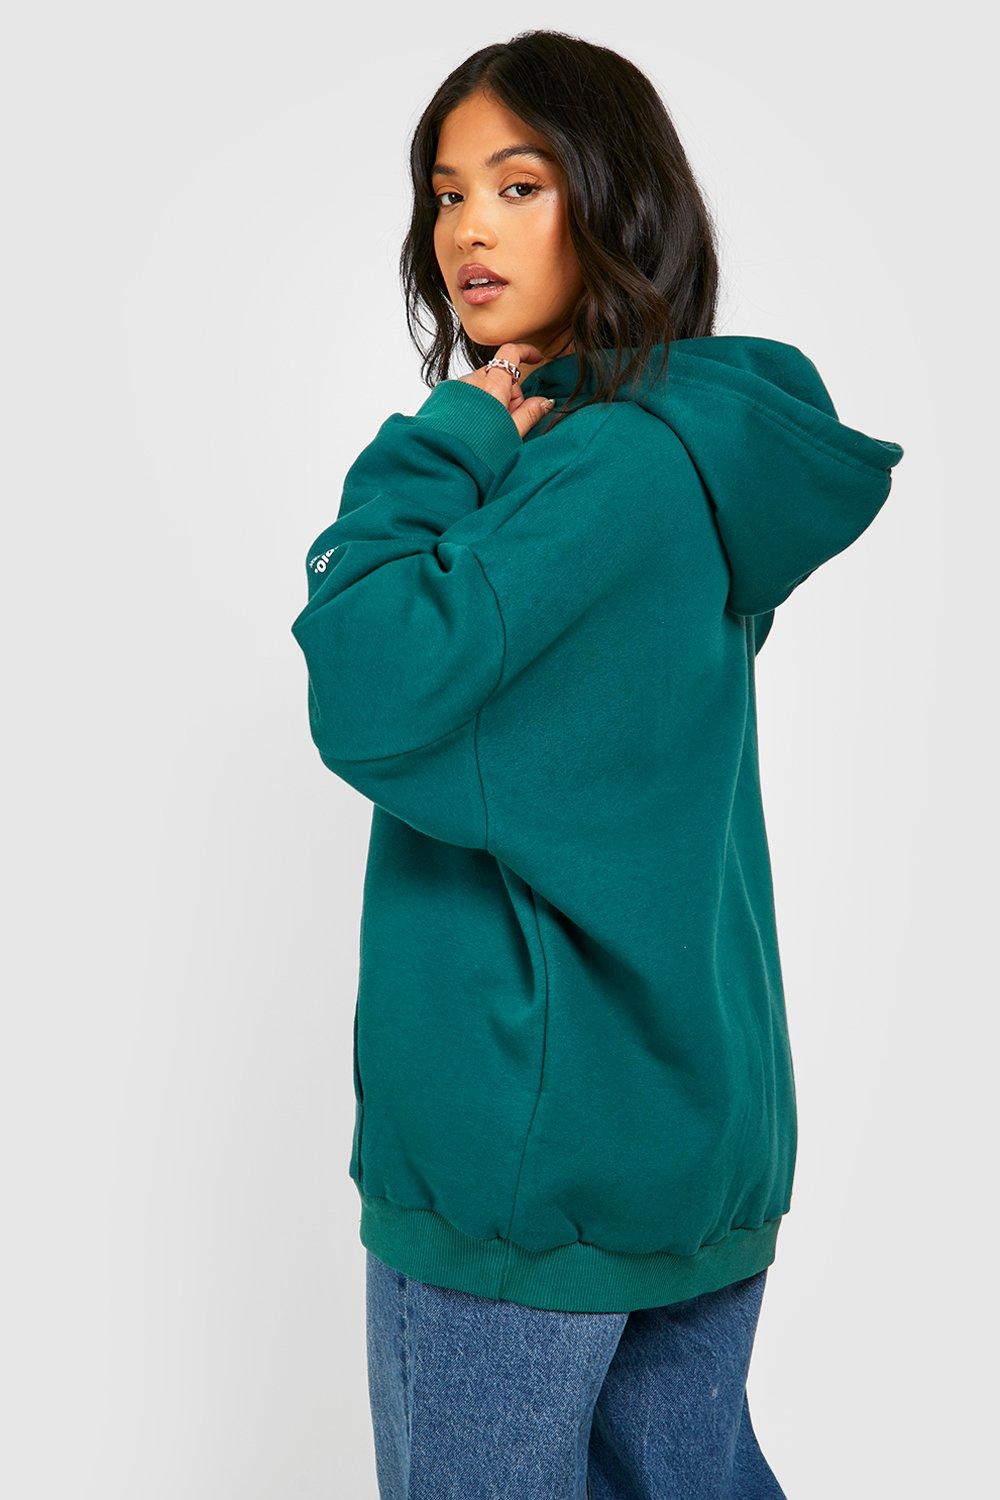 Outdoors Essentials Embroidered Oversized Hoodie